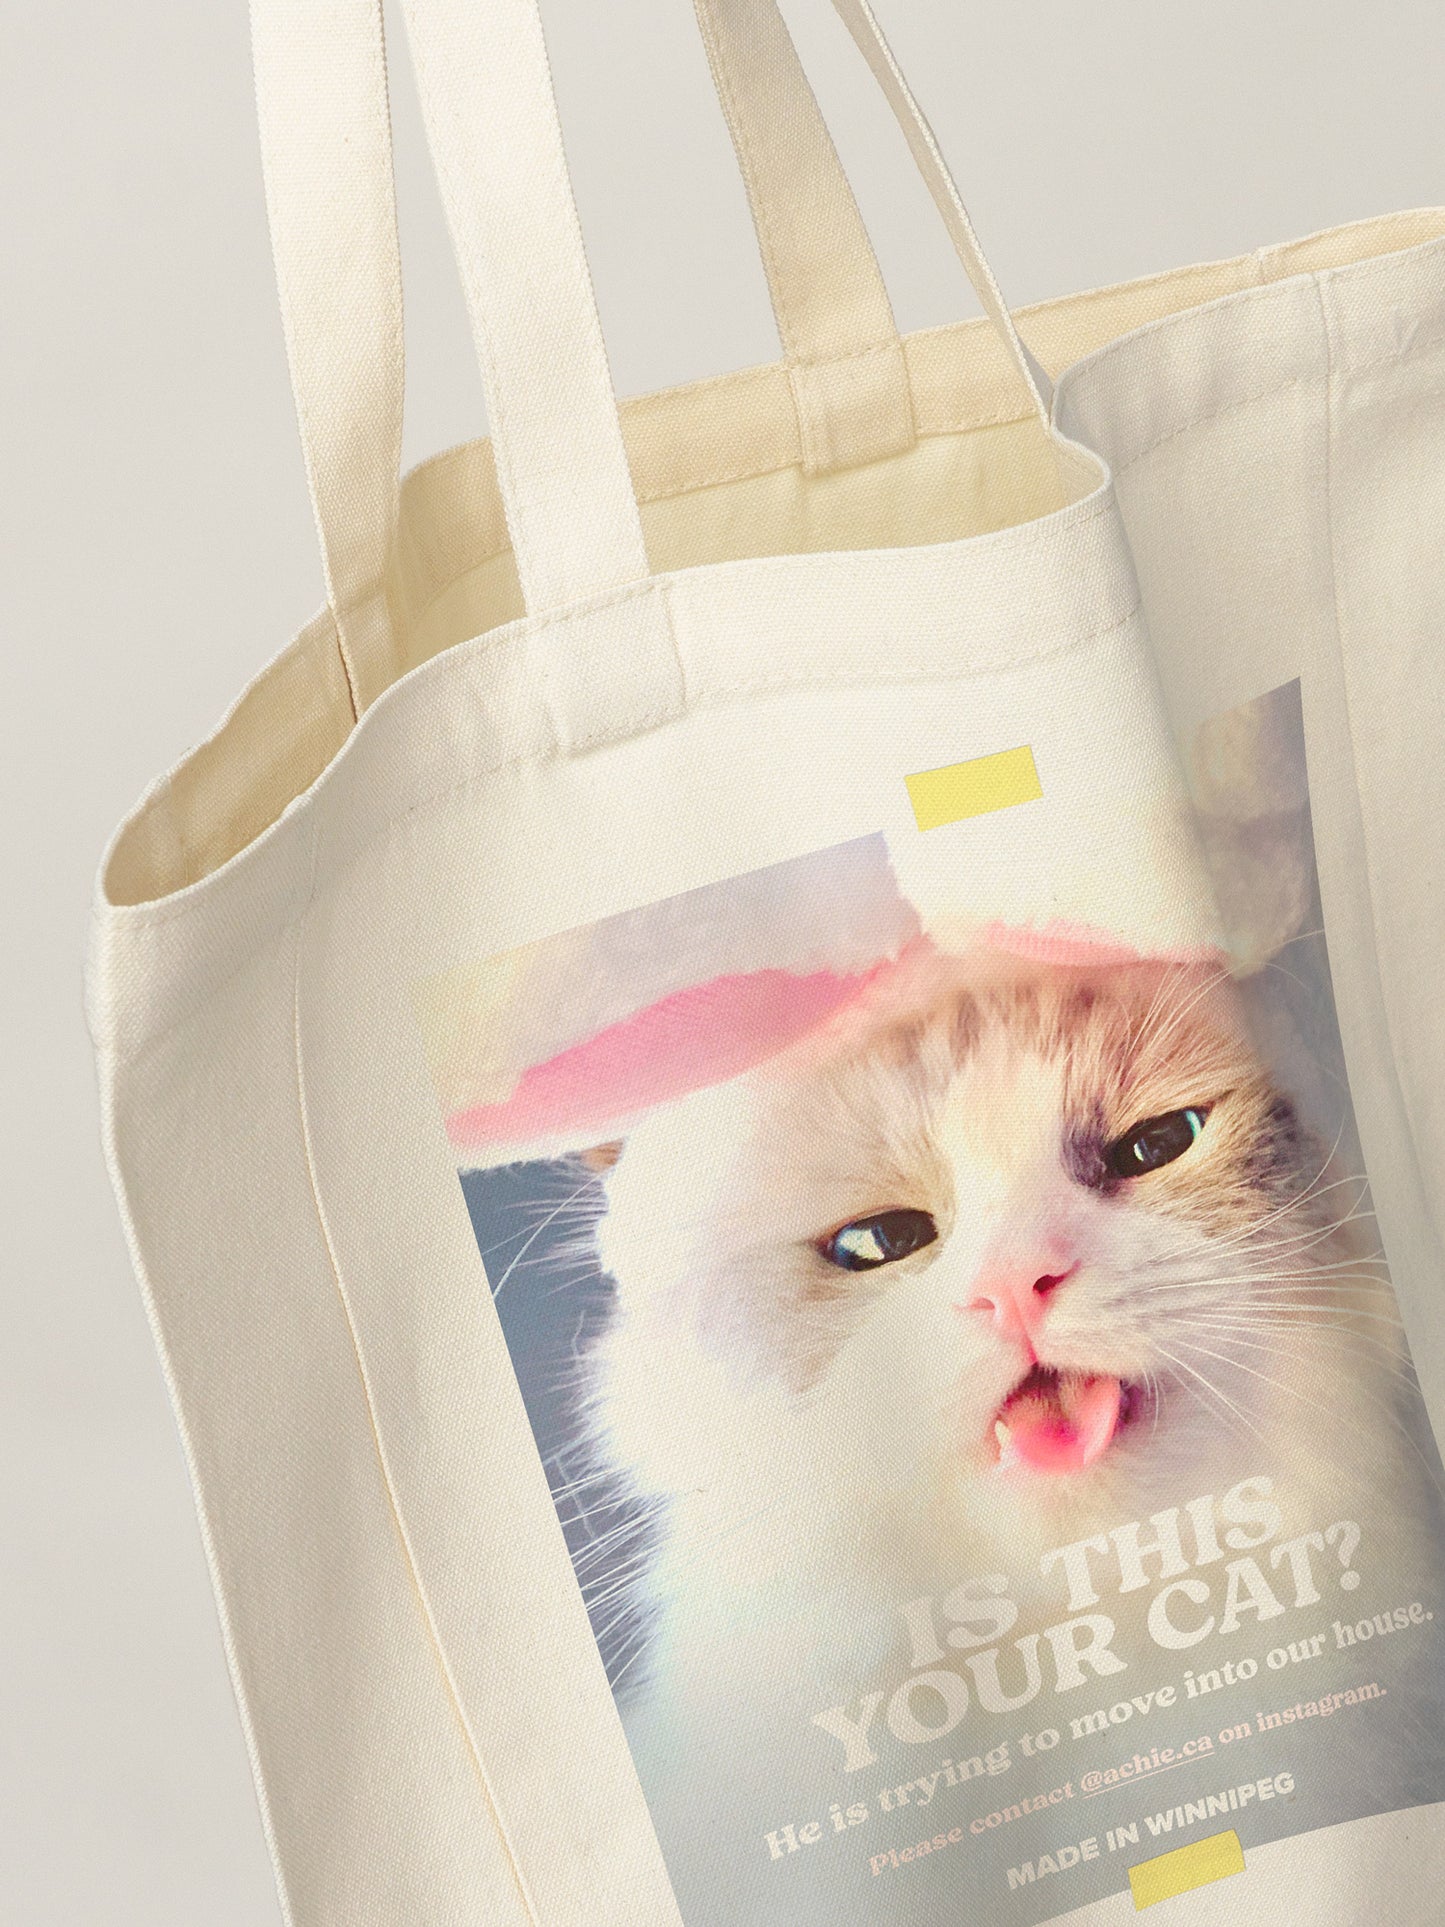 Is This Your Cat Tote Bag